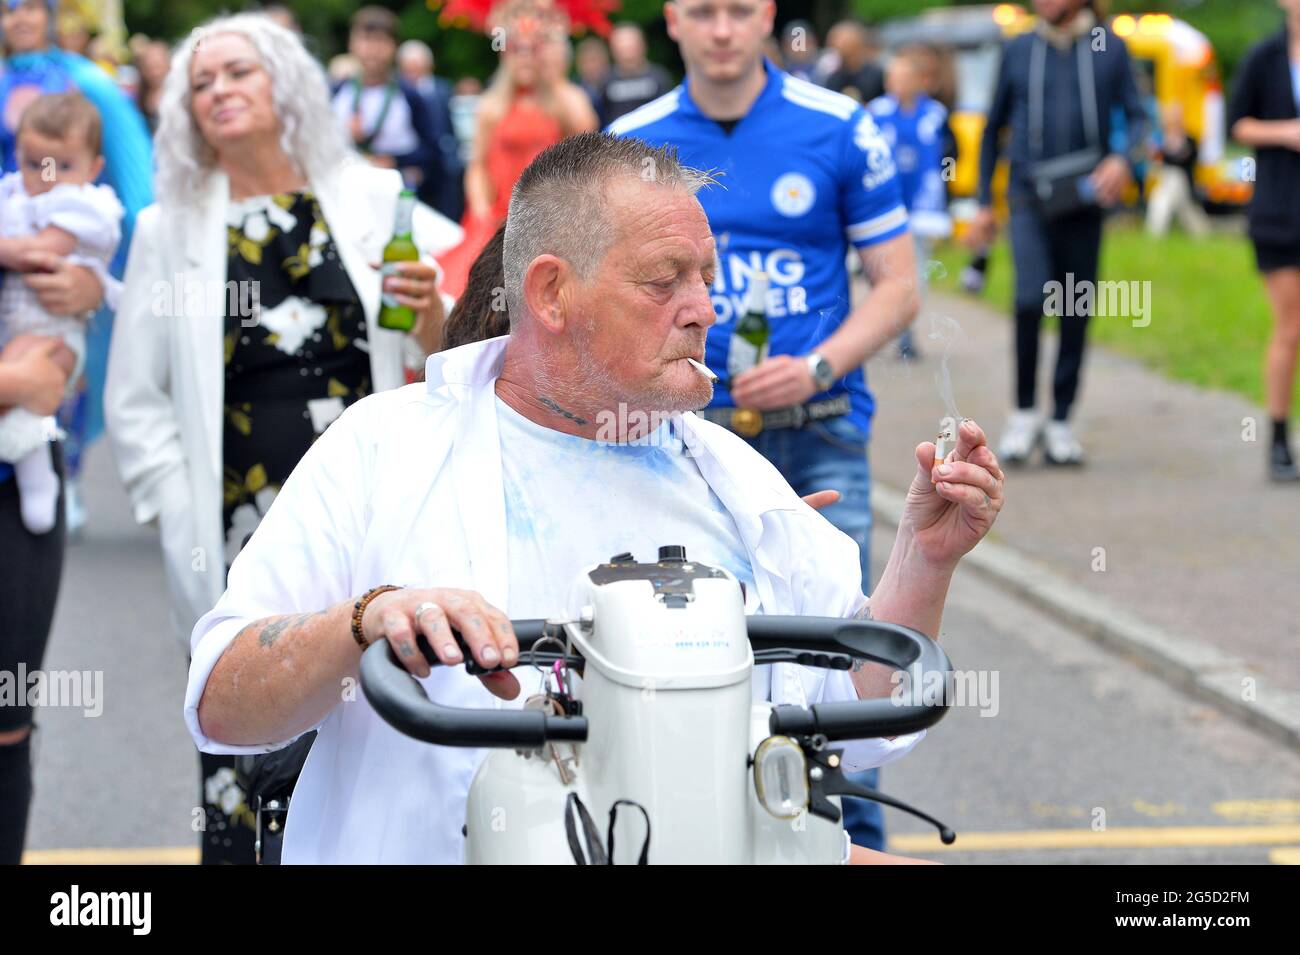 Leicester, UK. 26th June 2021. UK News. A funeral carnival parade for Mark Winkless, who turned his back on football hooliganism to persue a career as an actor, takes place around Braunstone Park in Leicester. The parade was attended by former Shameless actor Jody Latham. Alex Hannam/Alamy Live News Stock Photo